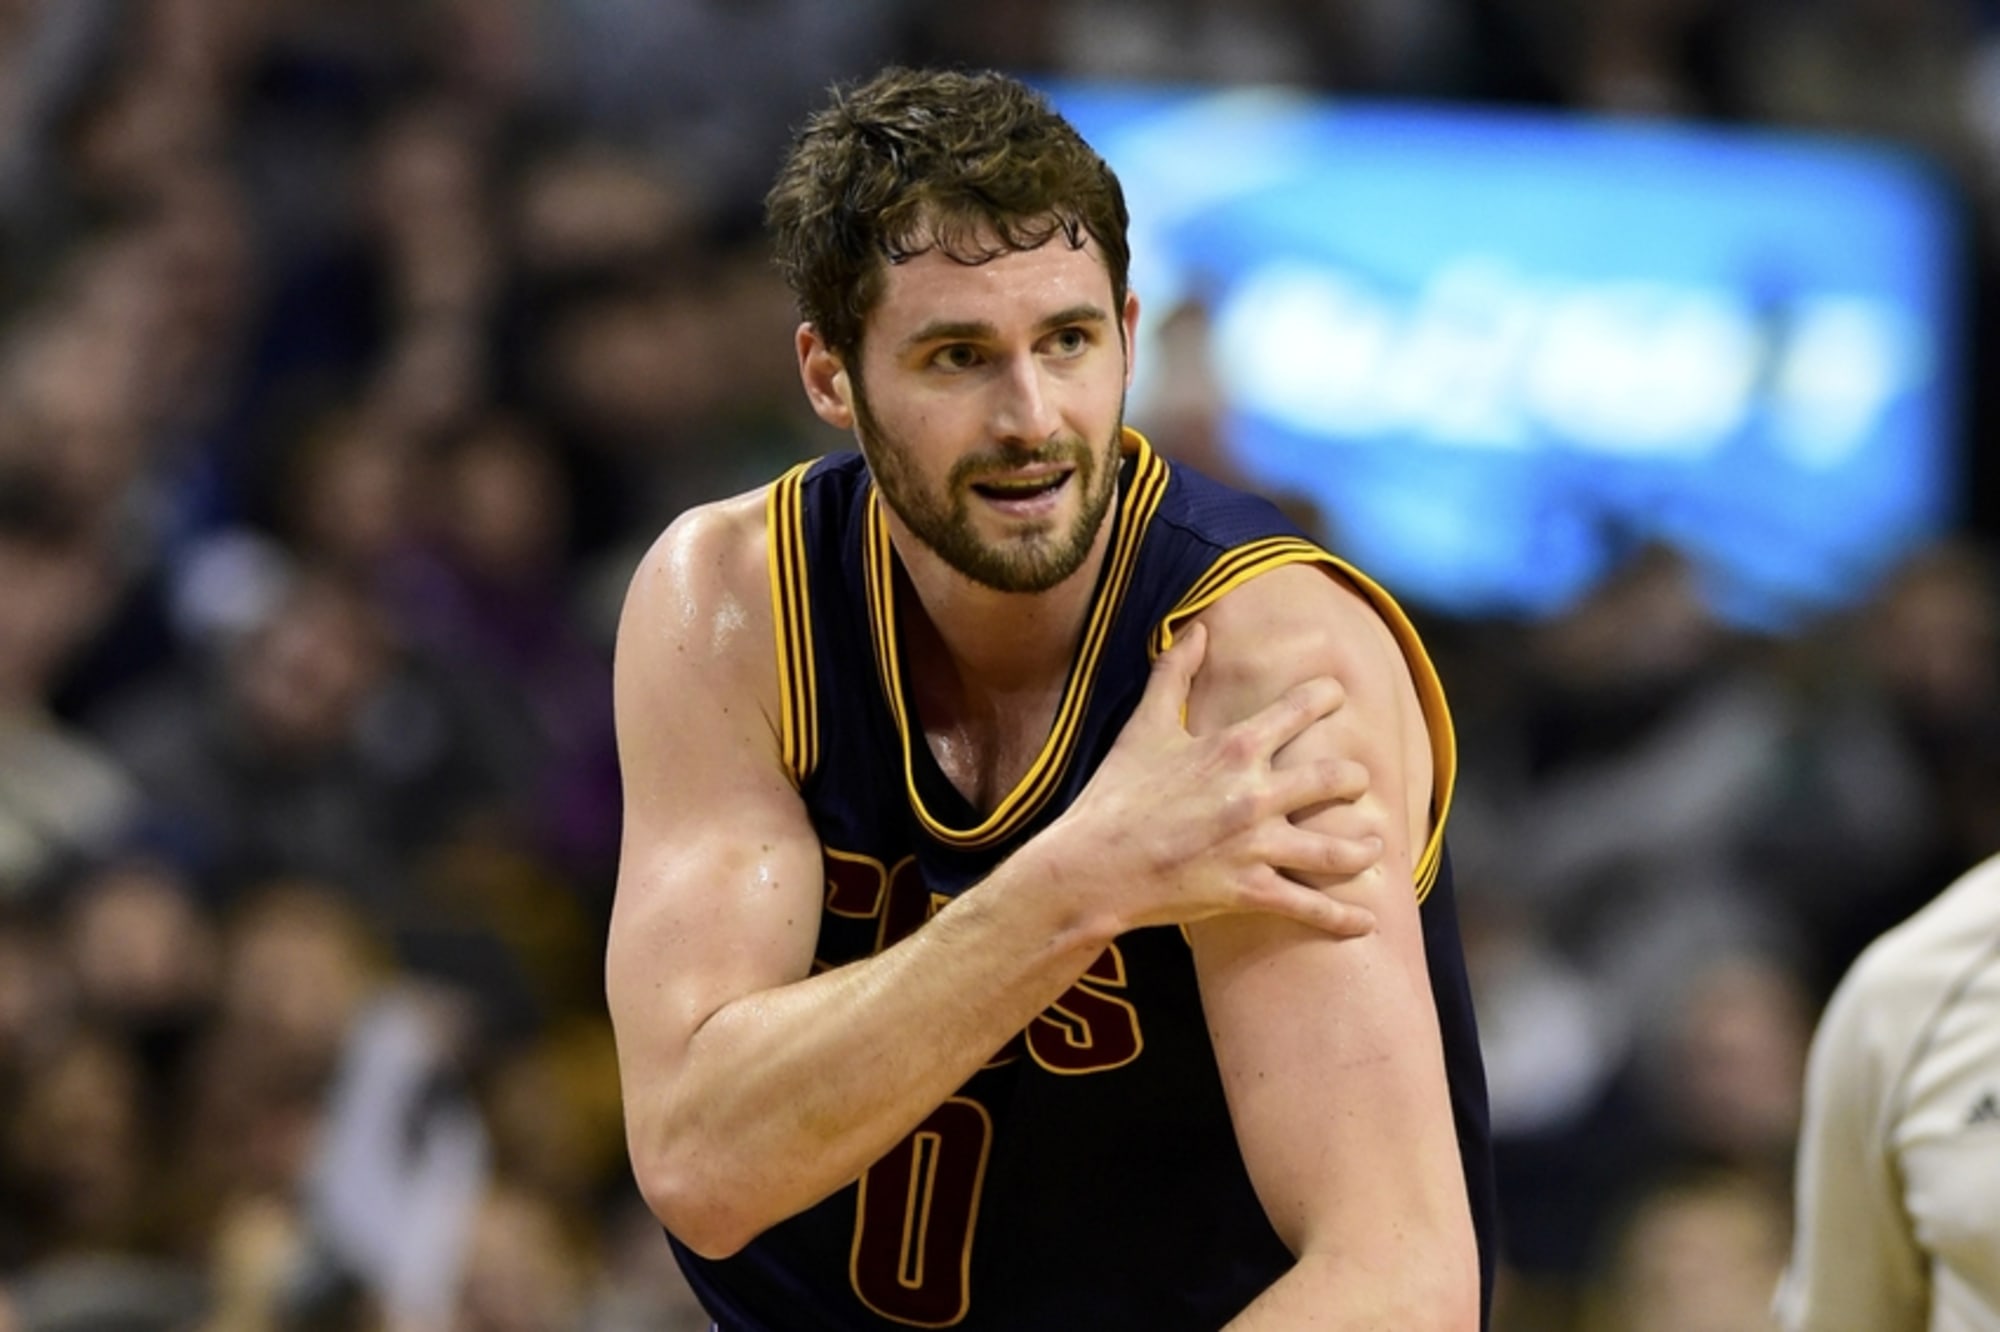 Nba Finals Pictures And Photos  Nba, Kevin love, Cleveland